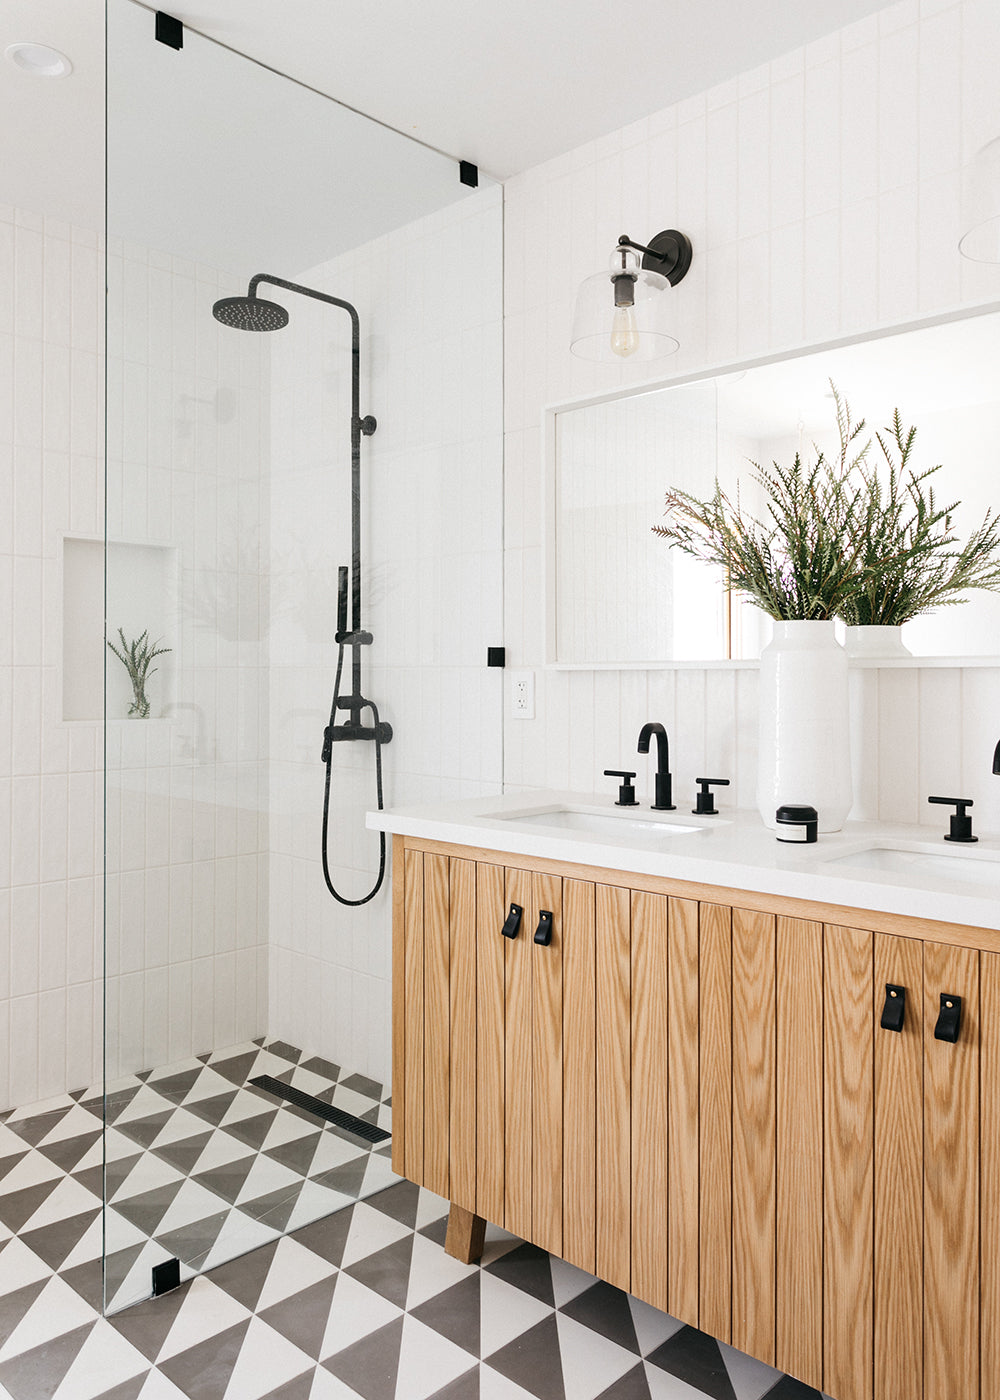 A bathroom with white tile walls, wood cabinet, black fixtures and a clé cement tile floor in black and white triangles.